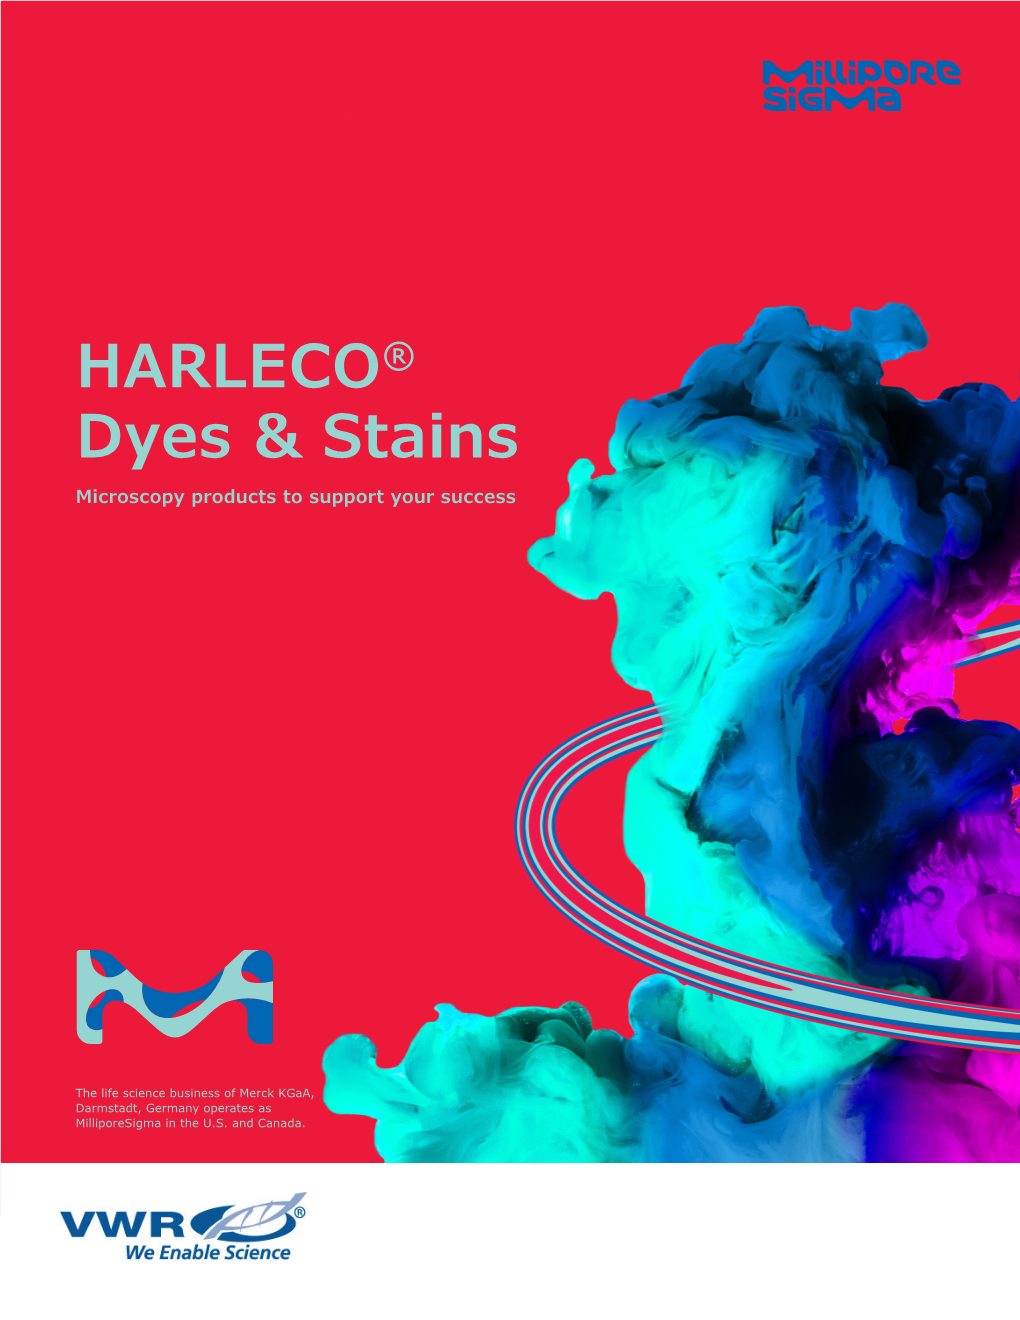 HARLECO® Dyes & Stains